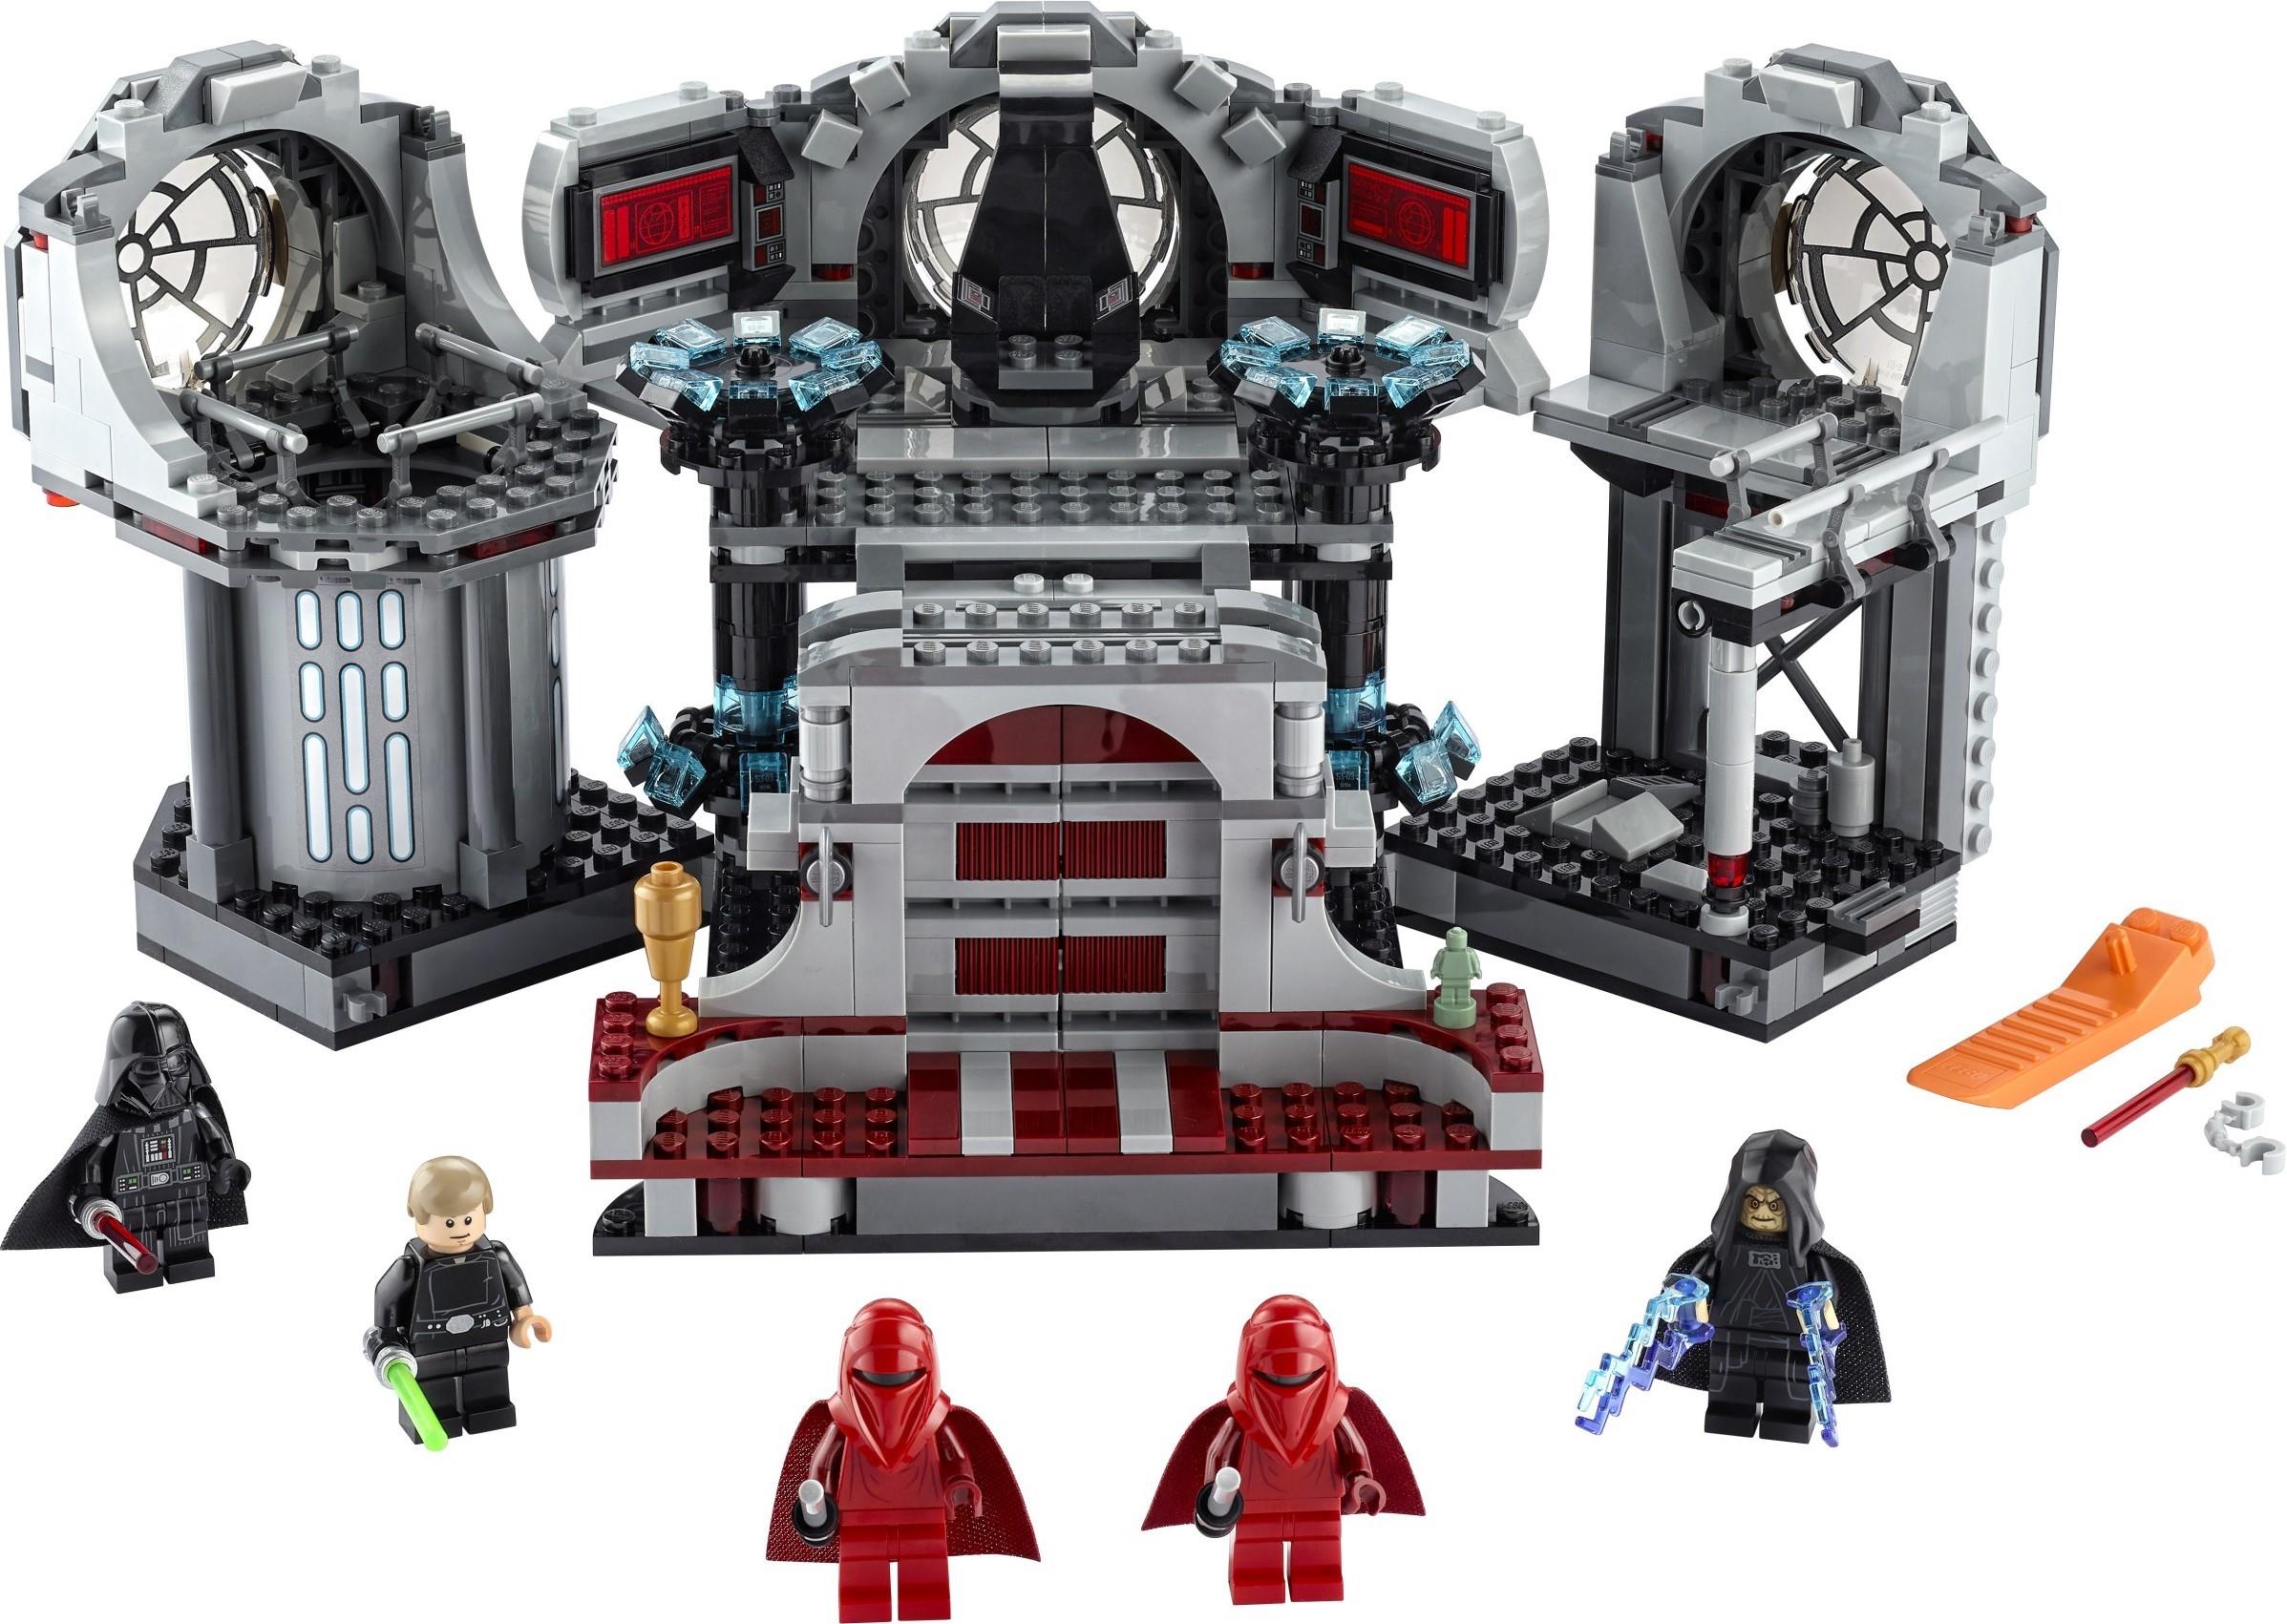 Snoke's Throne Room The Last Jedi Lego #75216 New & Sealed (Discontinued)